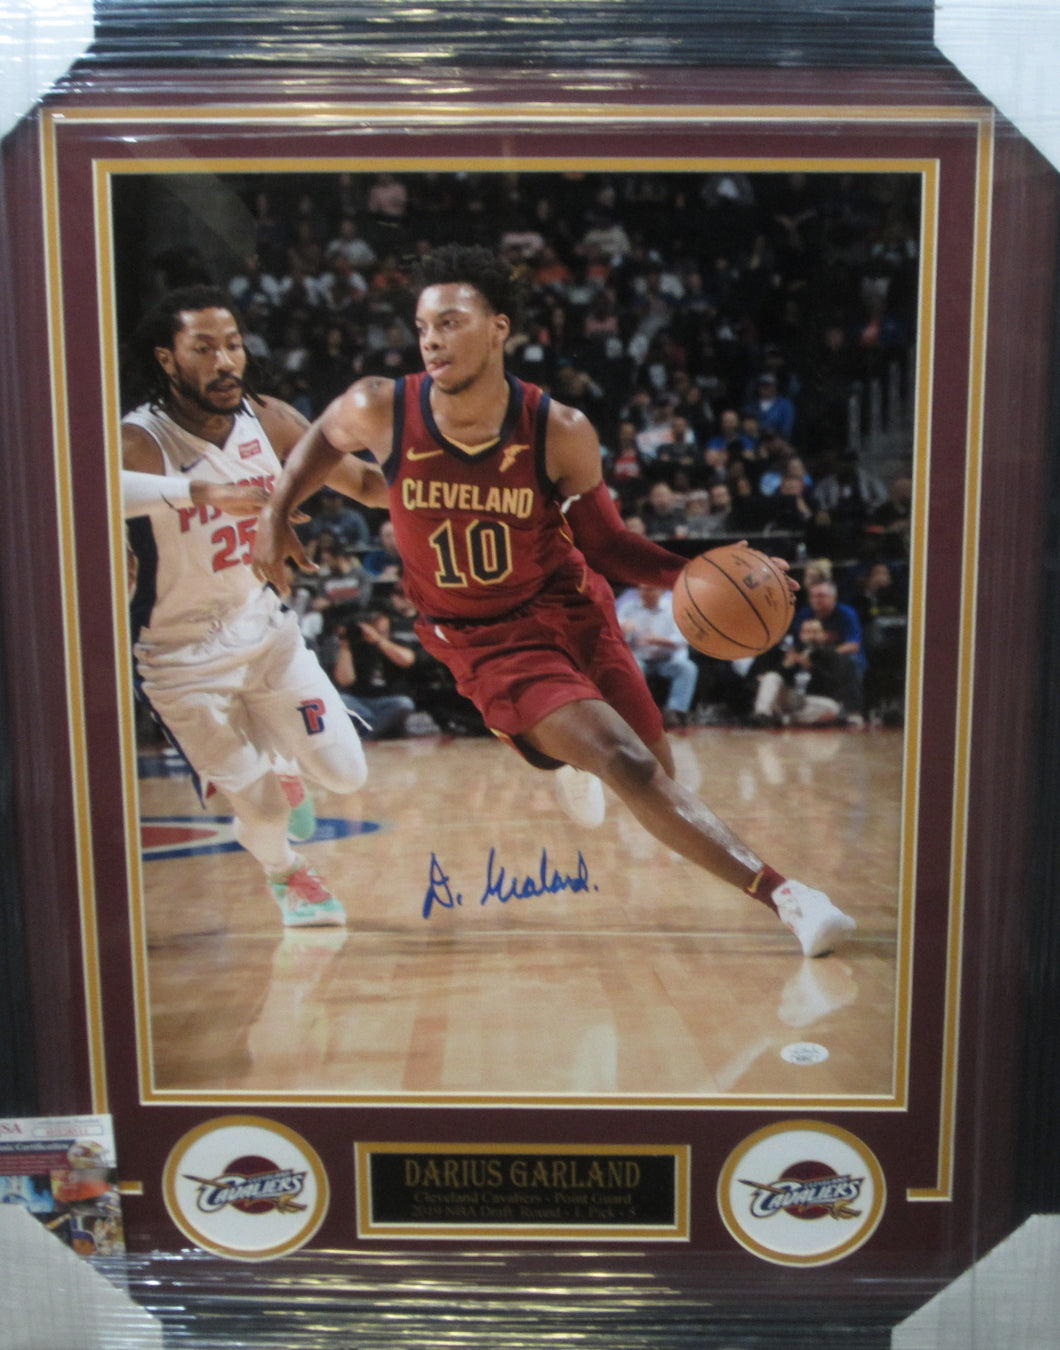 Cleveland Cavaliers Darius Garland Signed 16x20 Photo Framed & Matted with JSA COA